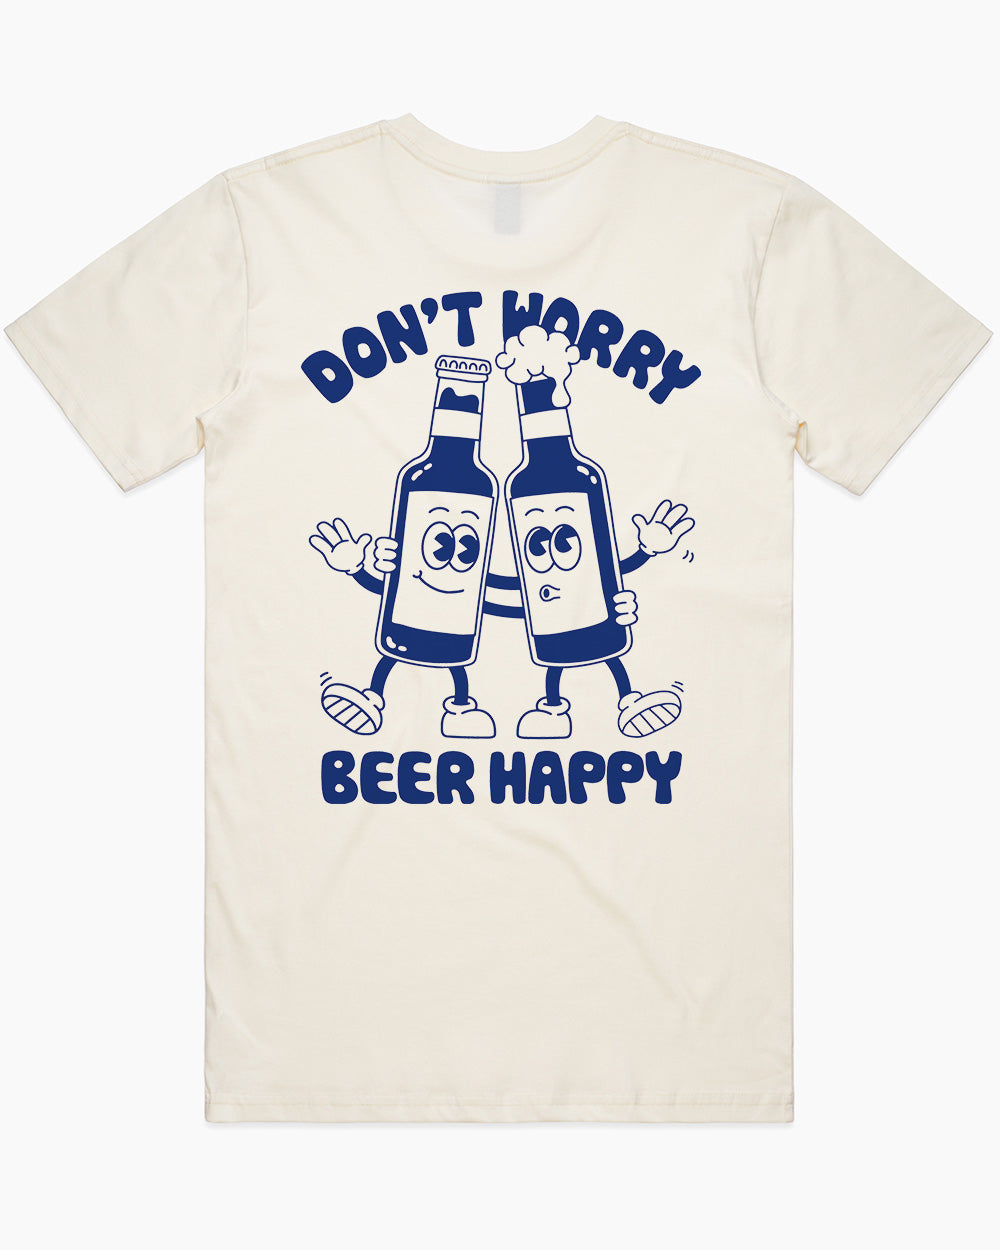 Don't Worry, Beer Happy T-Shirt